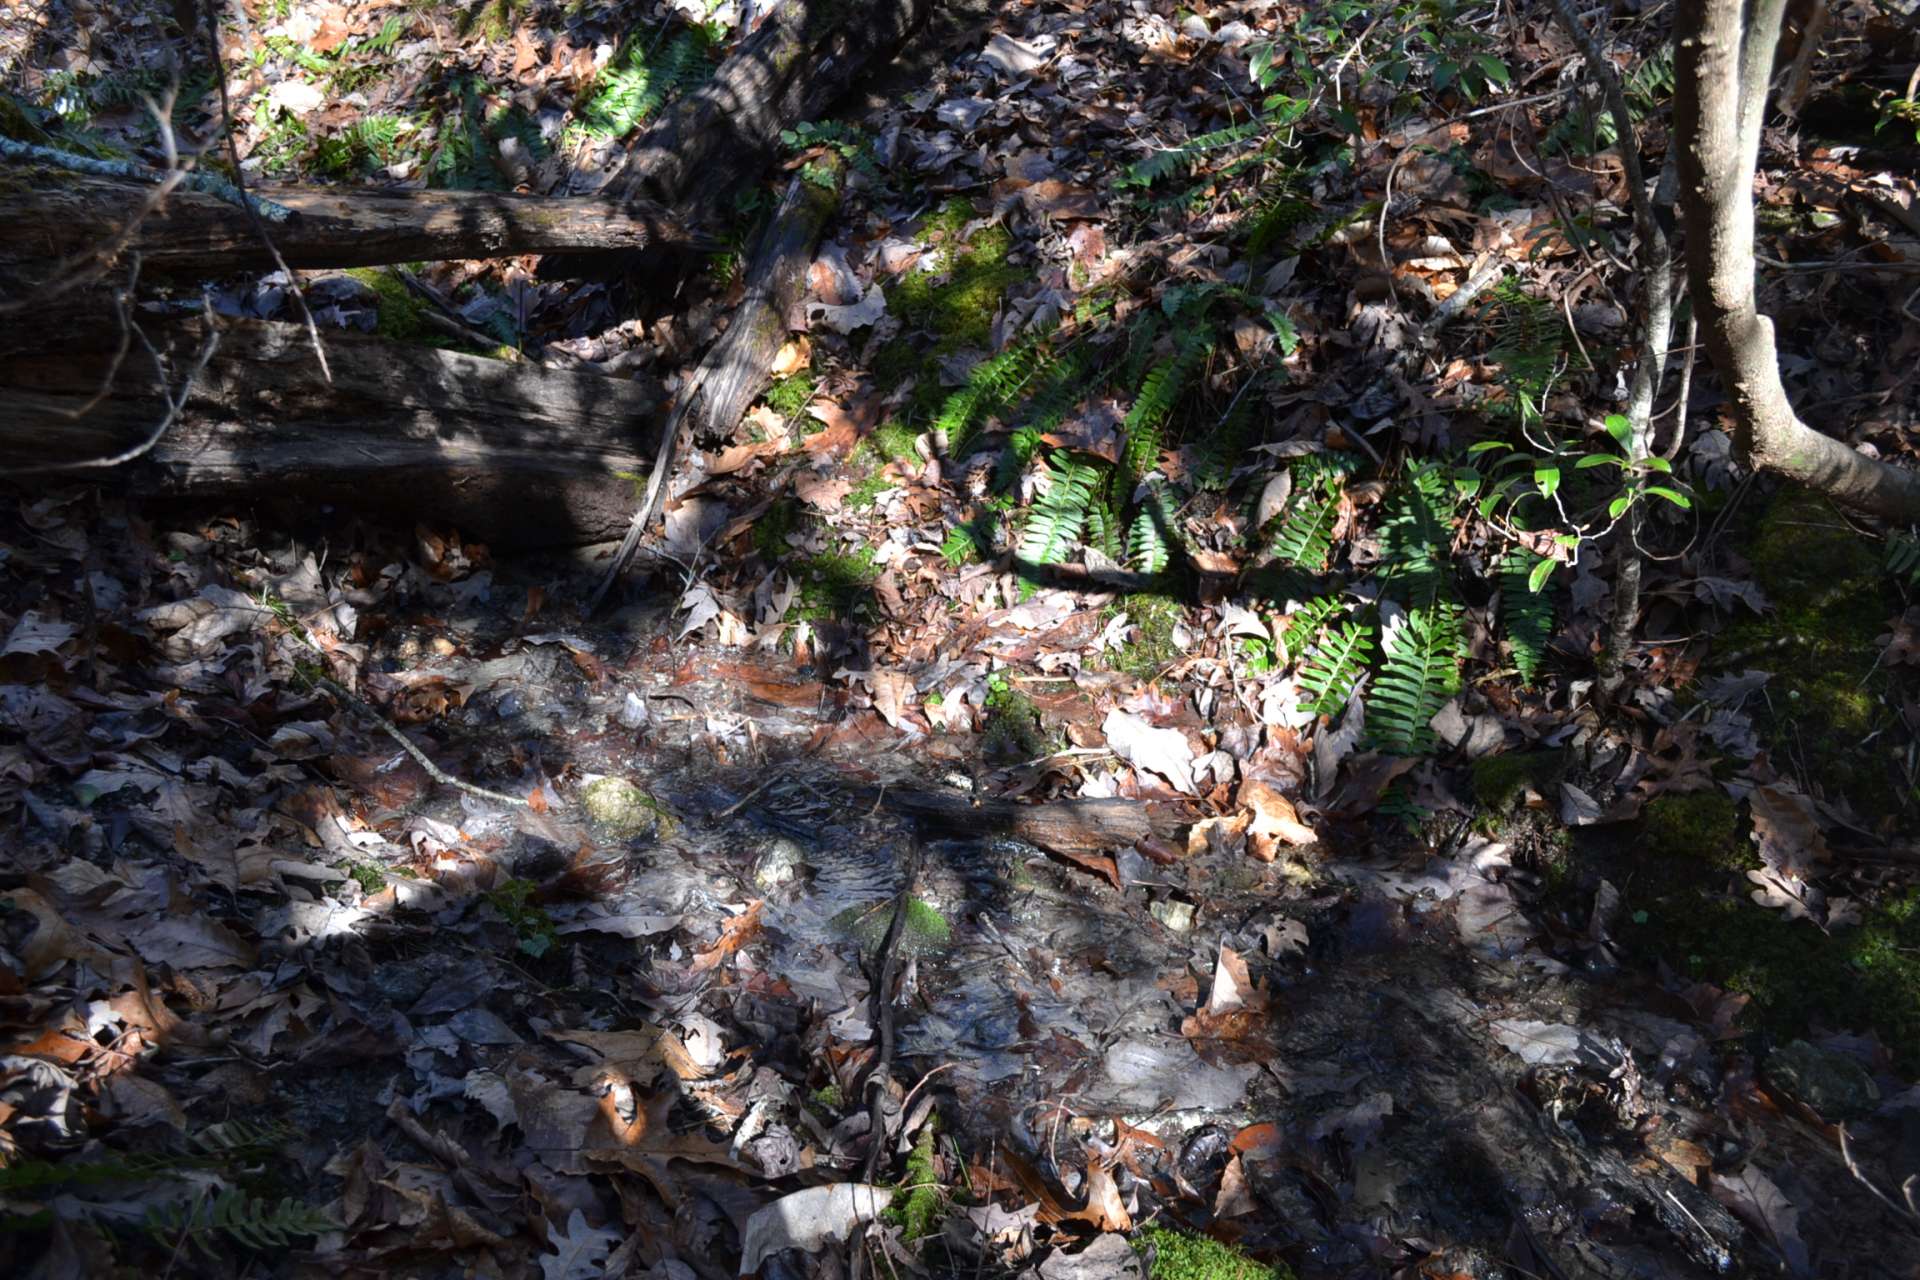 Small mountain brooks meander through the woodlands providing a water source for wildlife and pond potential.